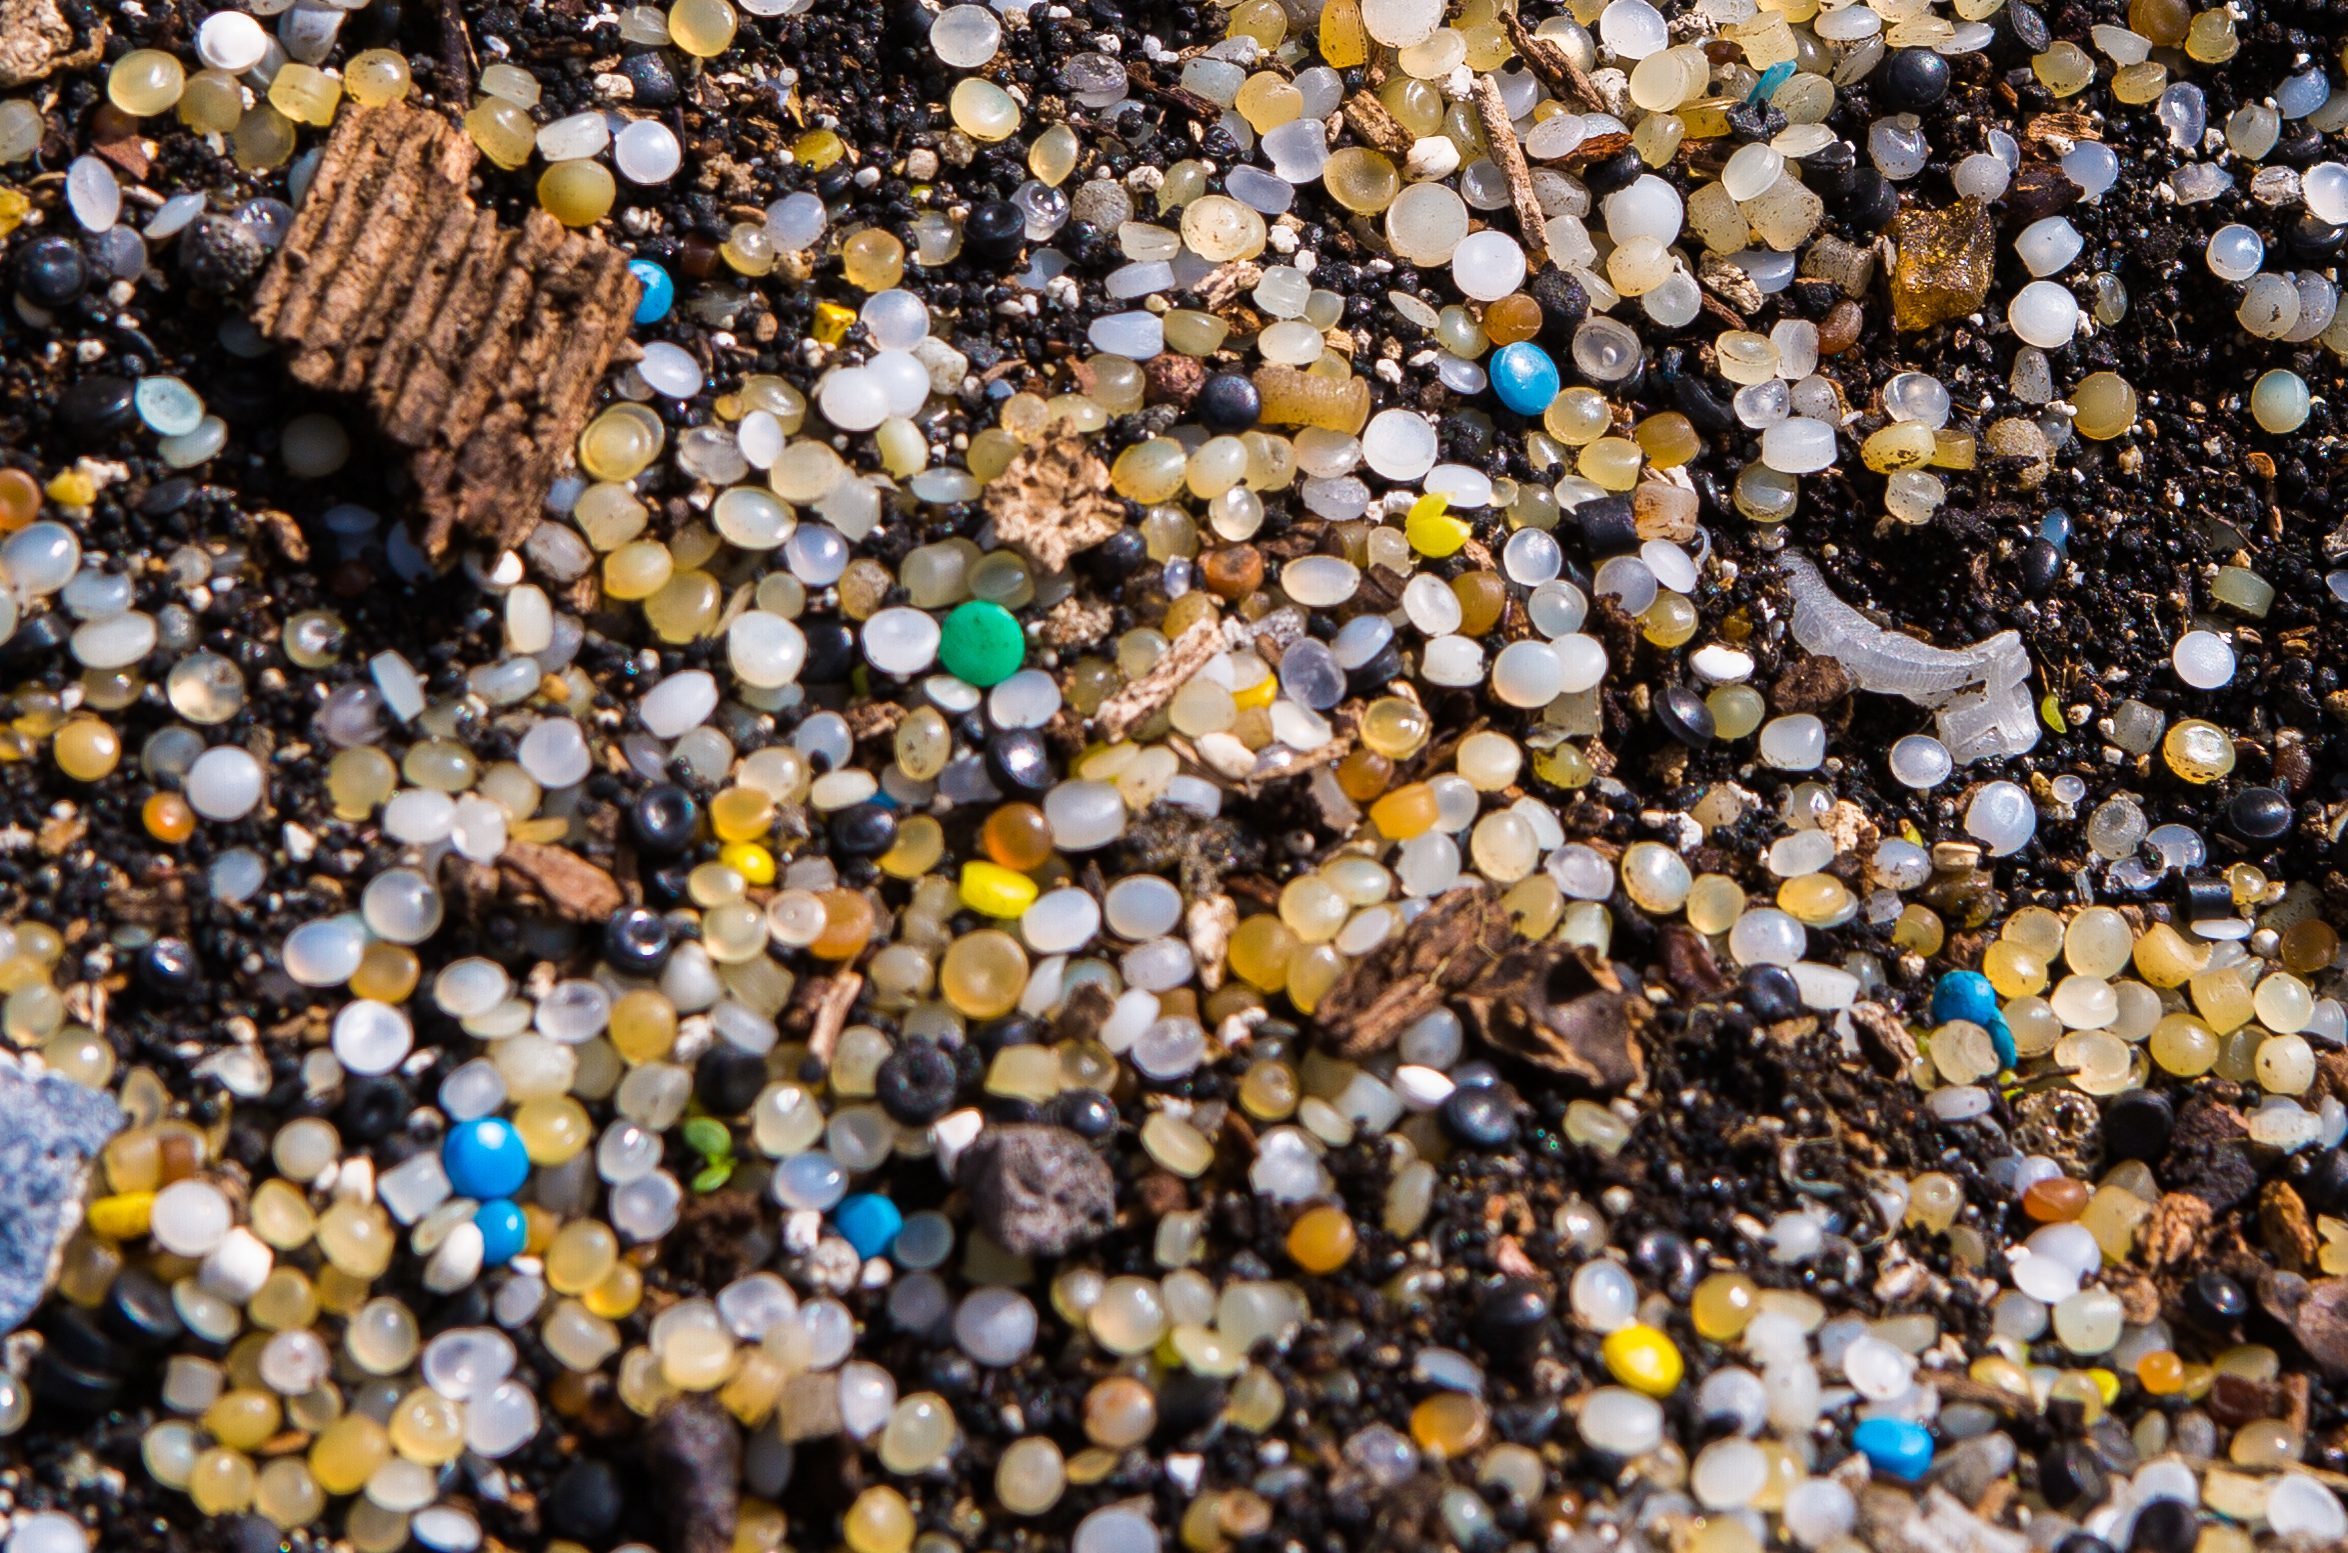 Nurdles washed up in North Queensferry.